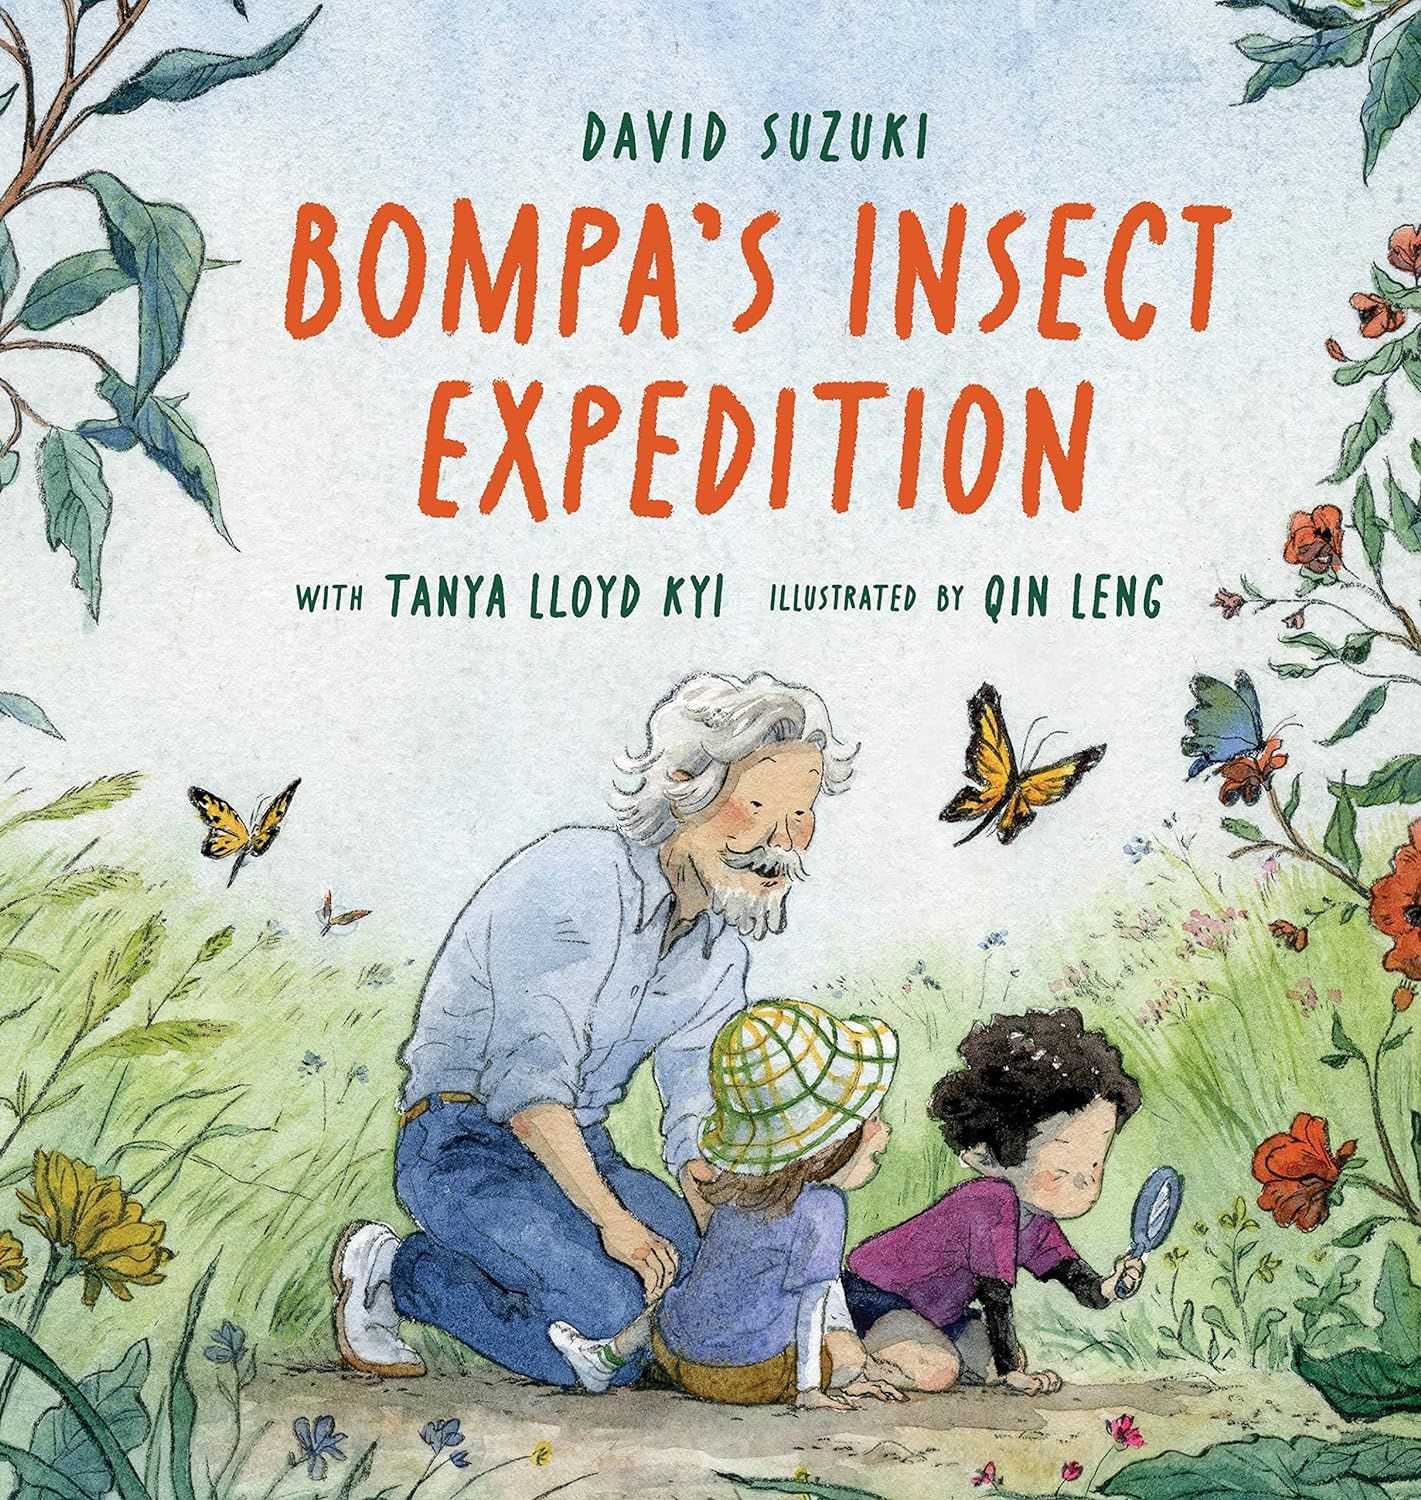 Bompa’s Insect Expedition – Cover by David Suzuki